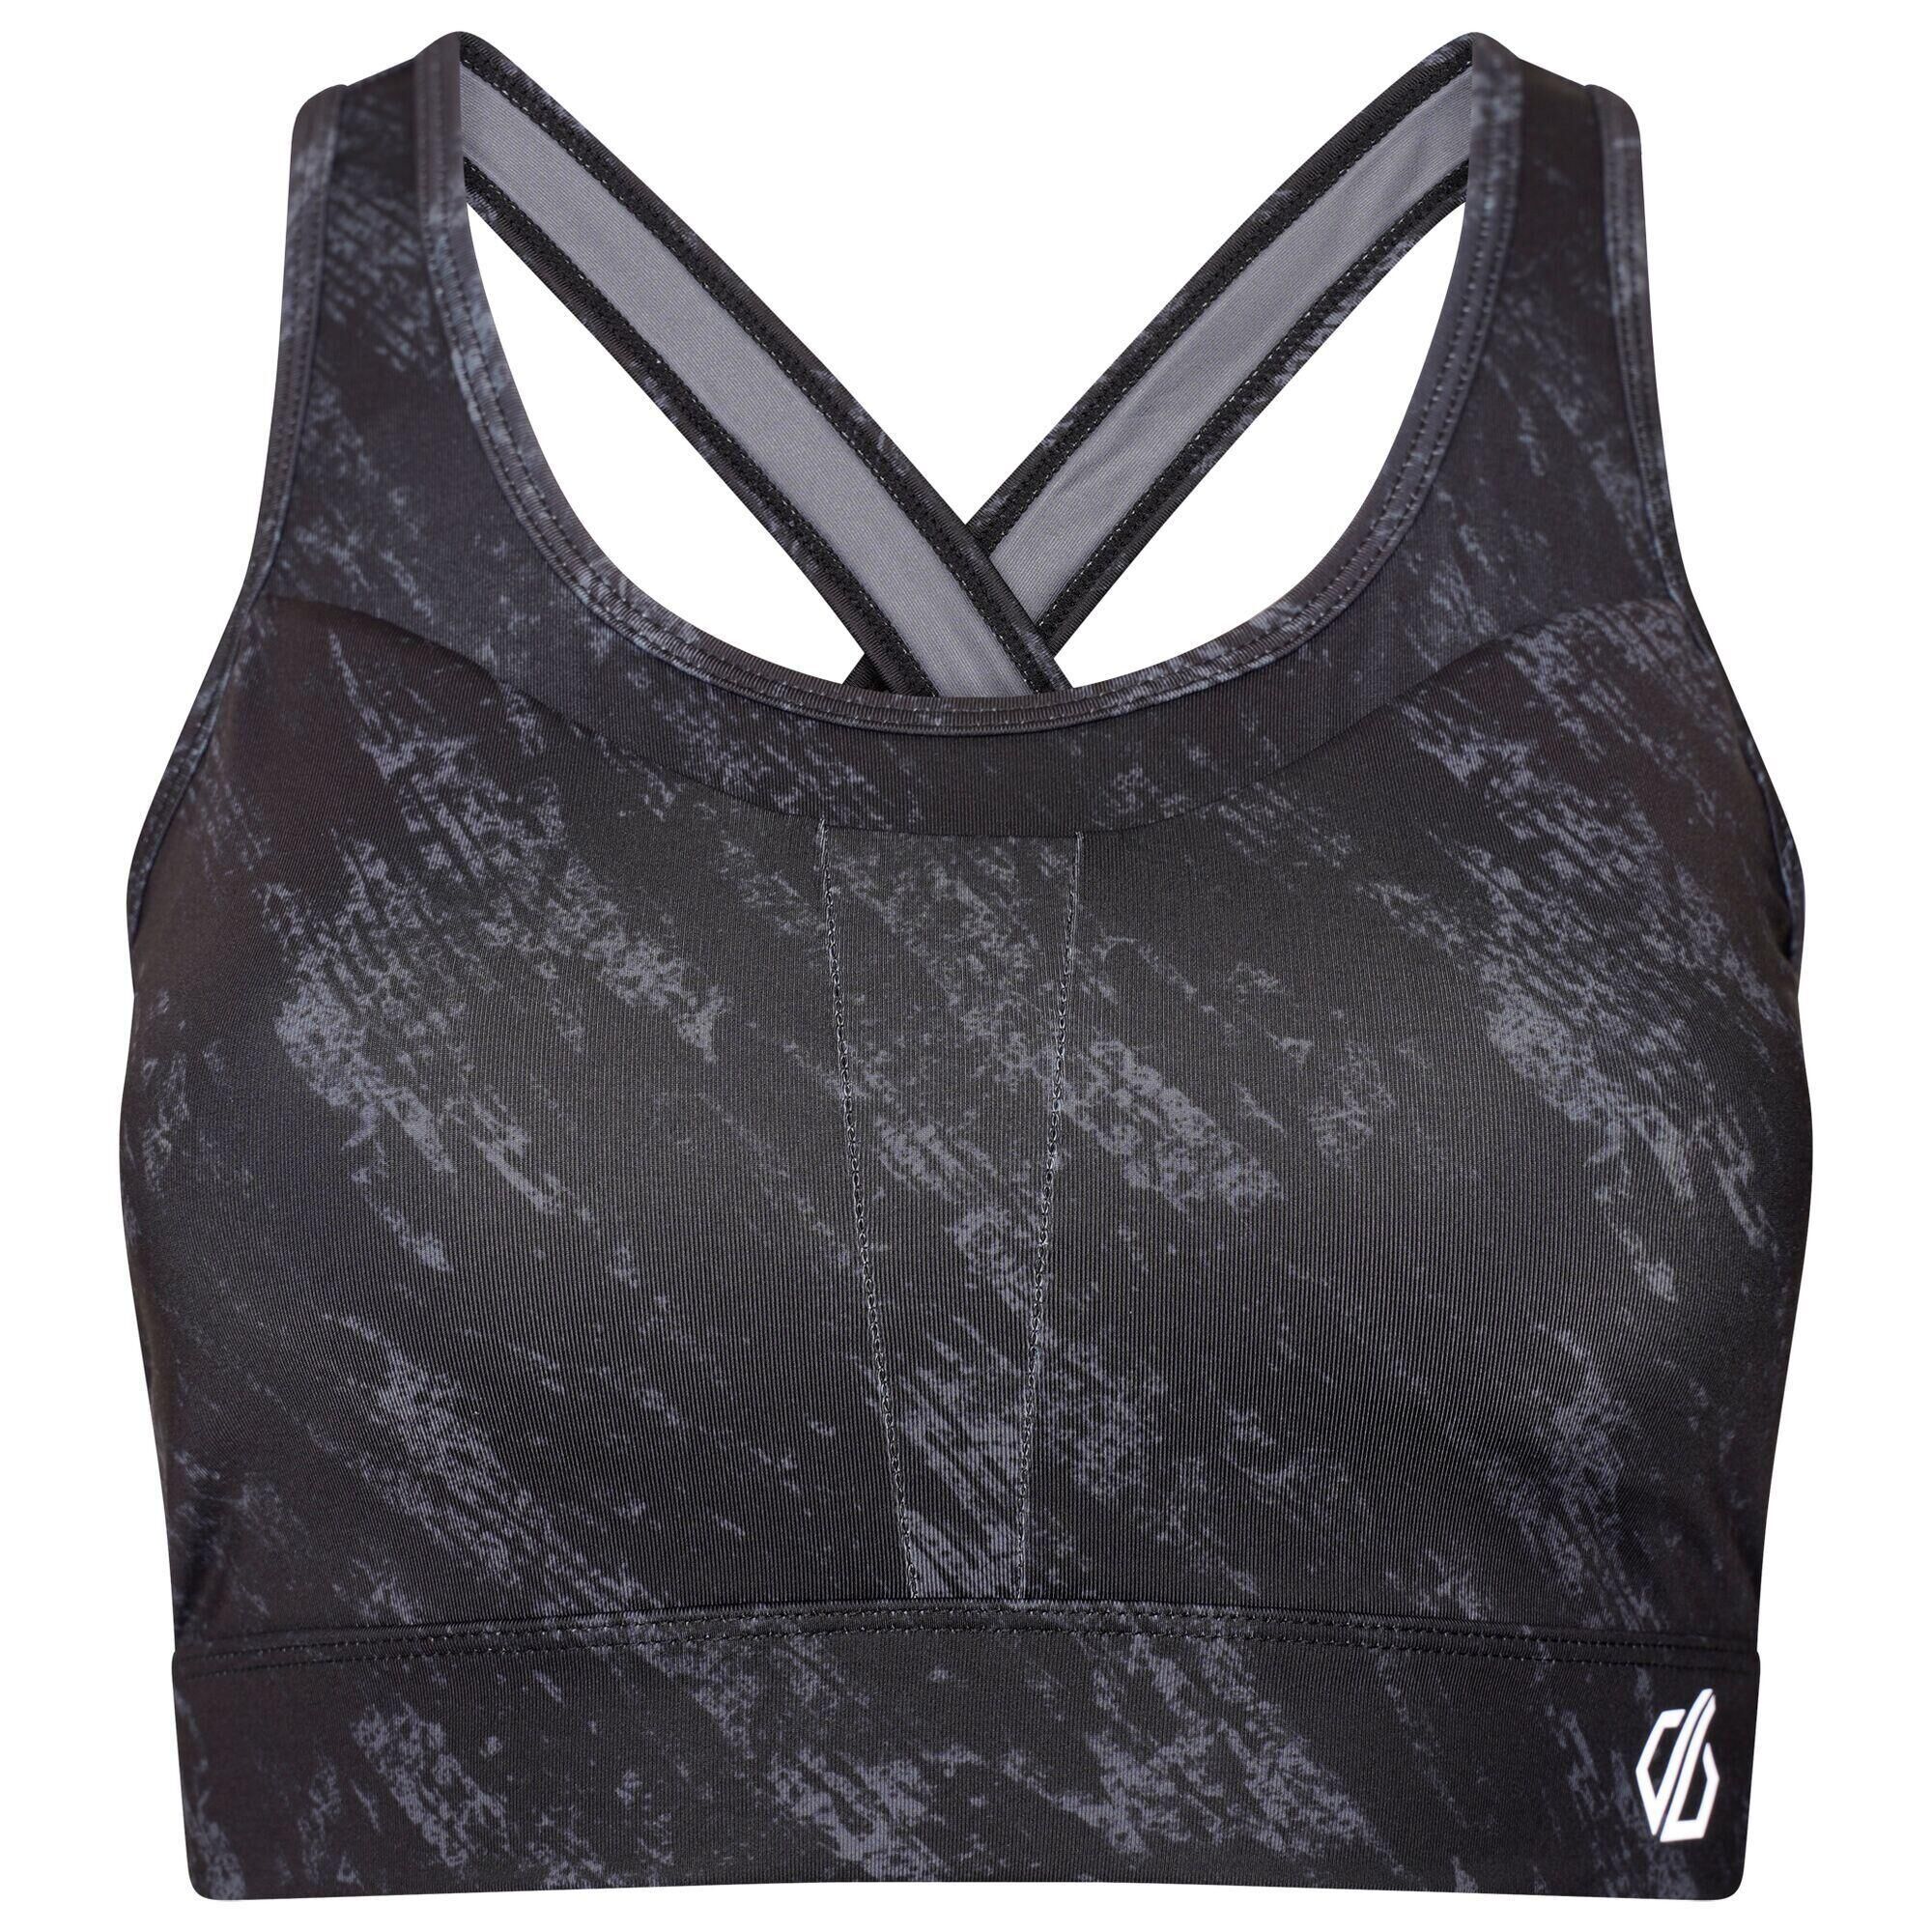 Decathlon Malta - Looking for new fitness apparel for your home training?💪  A comfortable sports bra that you won't be able to live without, thanks to  its cross-over straps at the back